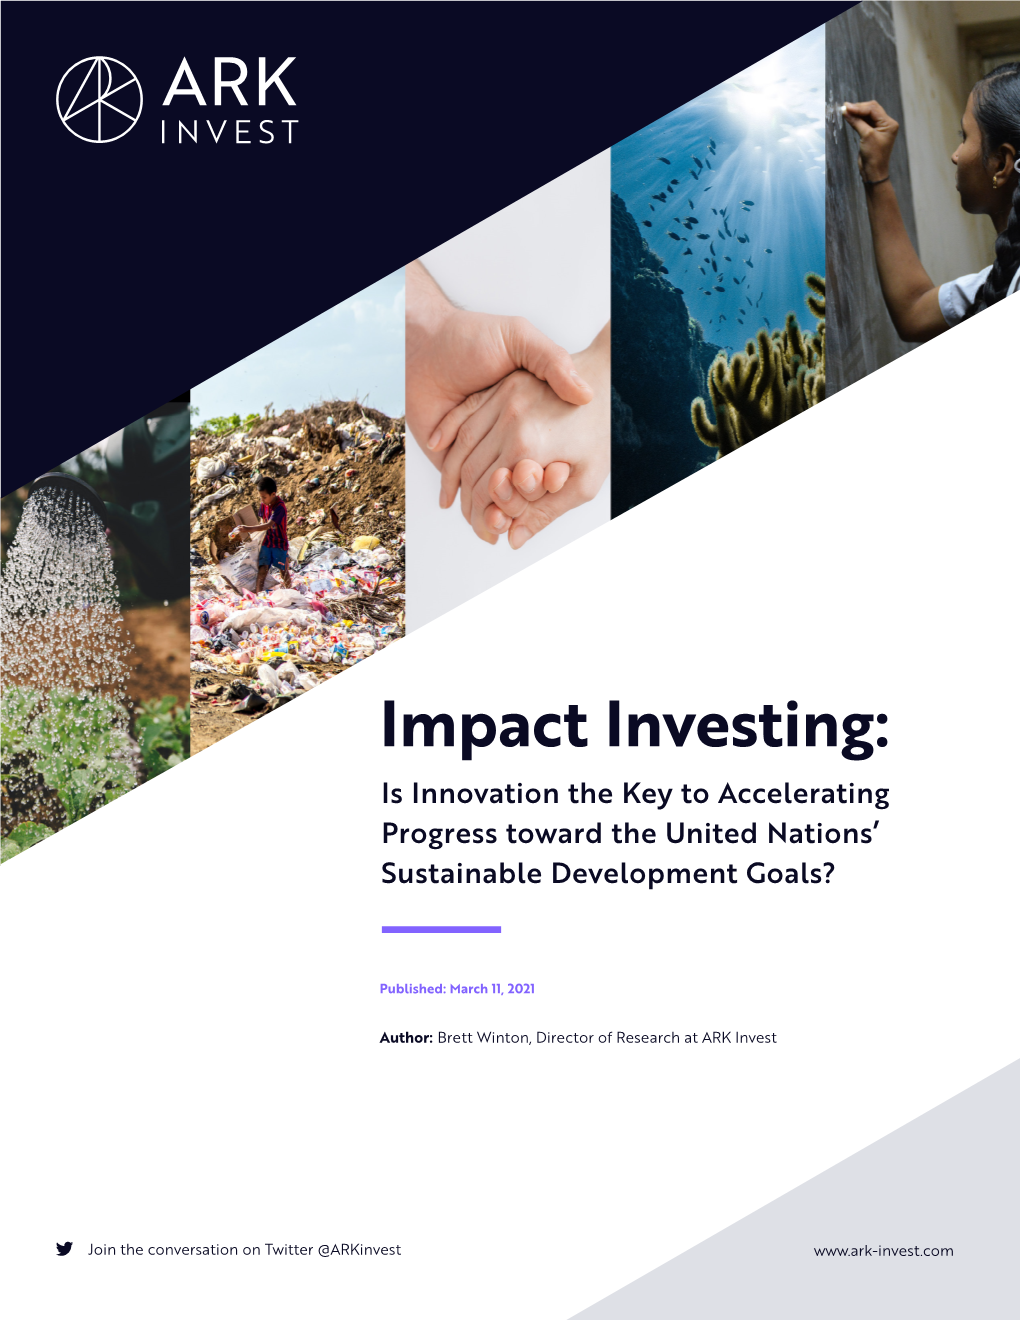 Impact Investing: Is Innovation the Key to Accelerating Progress Toward the United Nations’ Sustainable Development Goals?